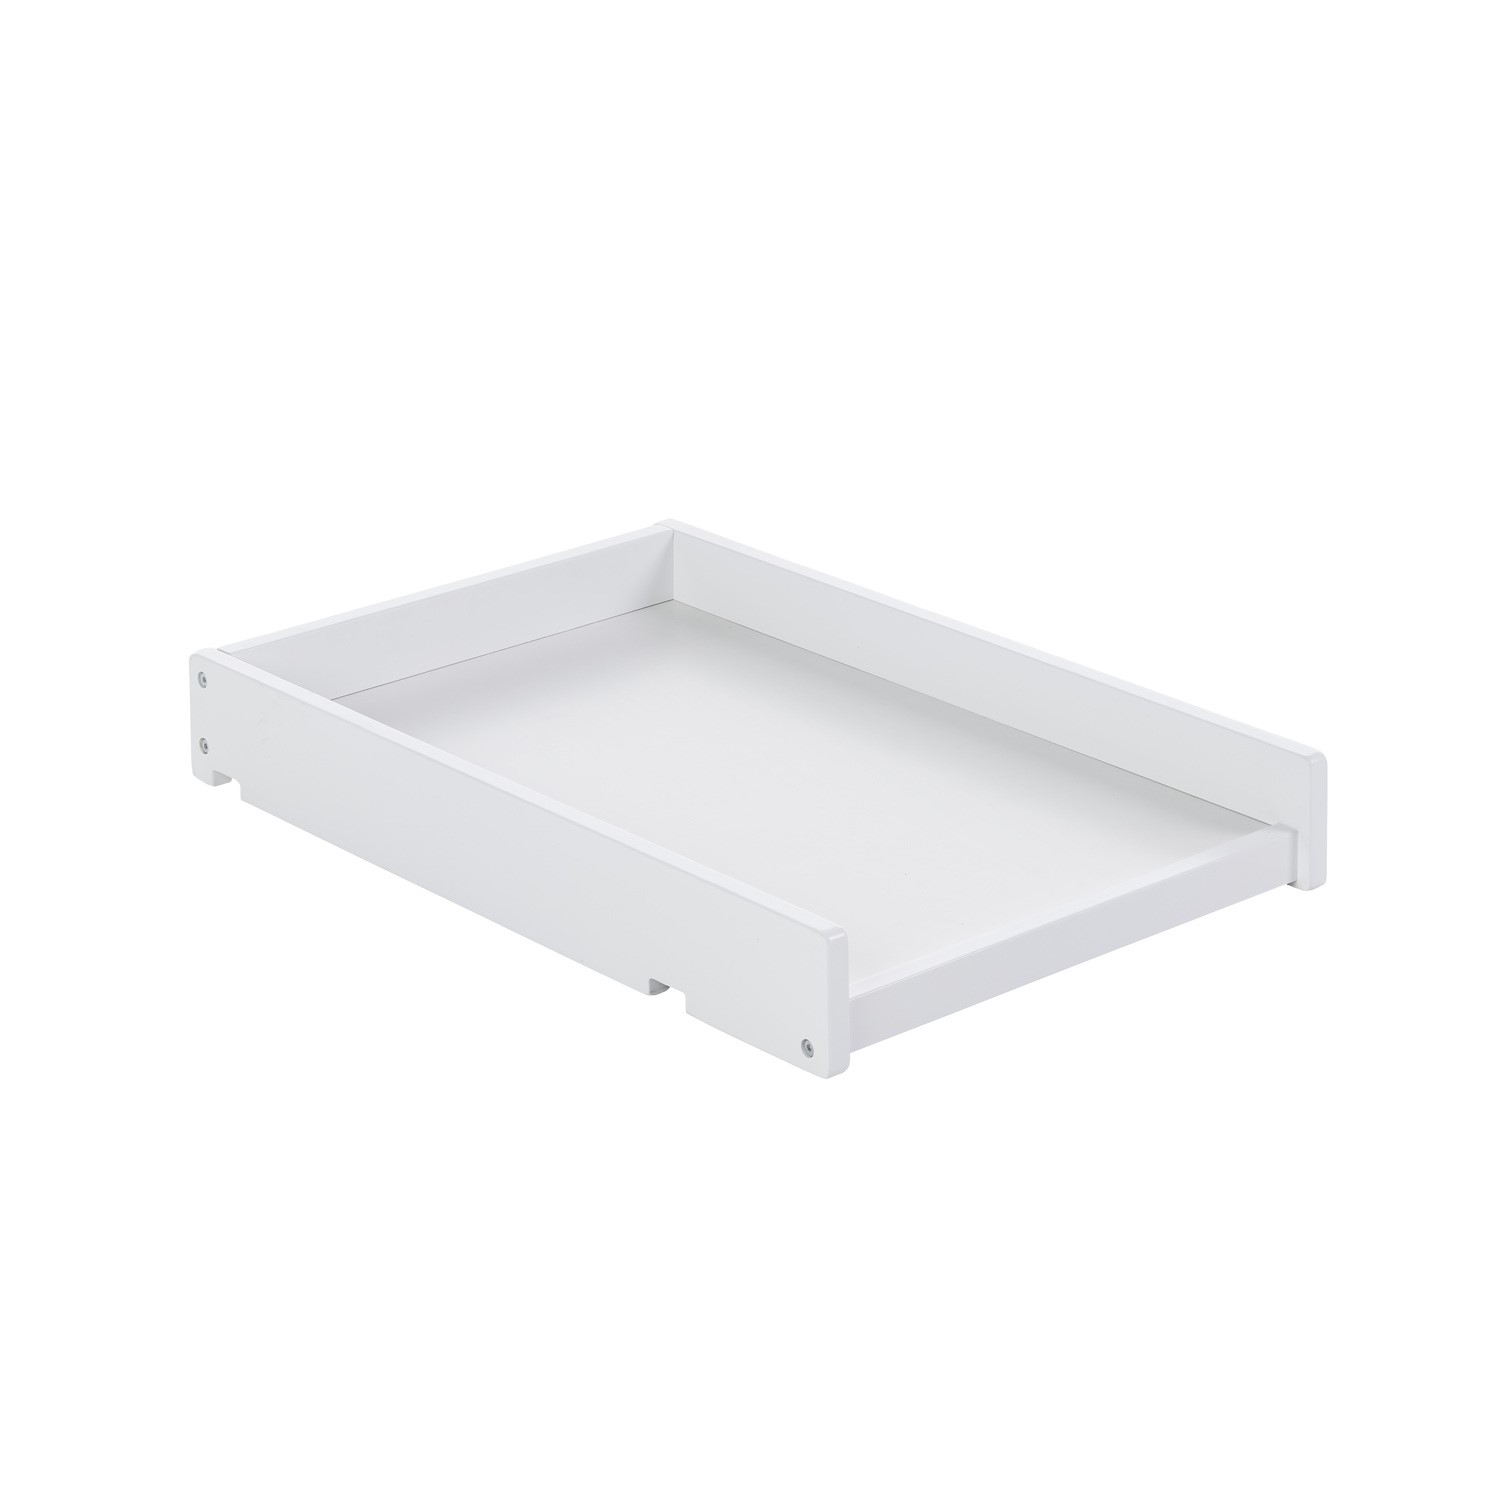 Photo of White space saver cot top changer - obaby